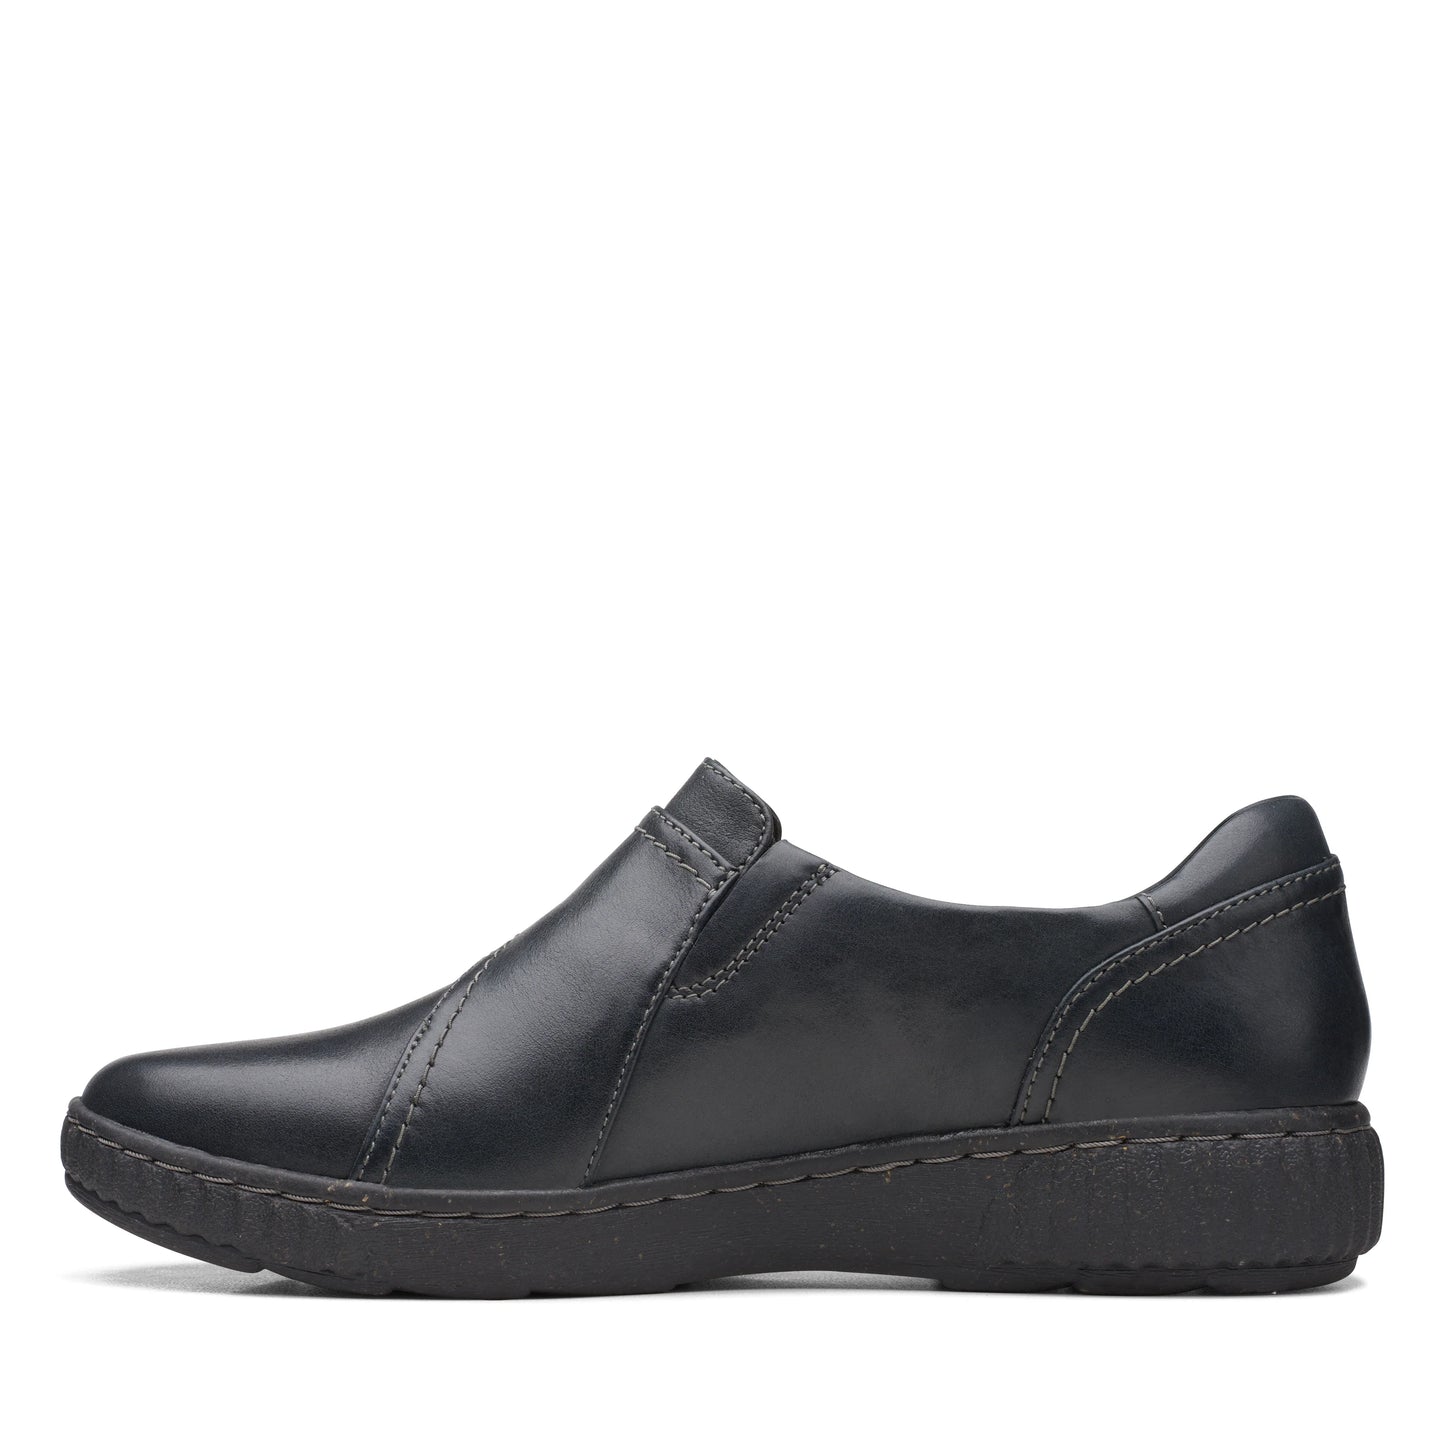 CLARKS | ZAPATOS SIN CORDONES ON SHOES MUJER | CAROLINE PEARL BLACK LEATHER | NEGRO